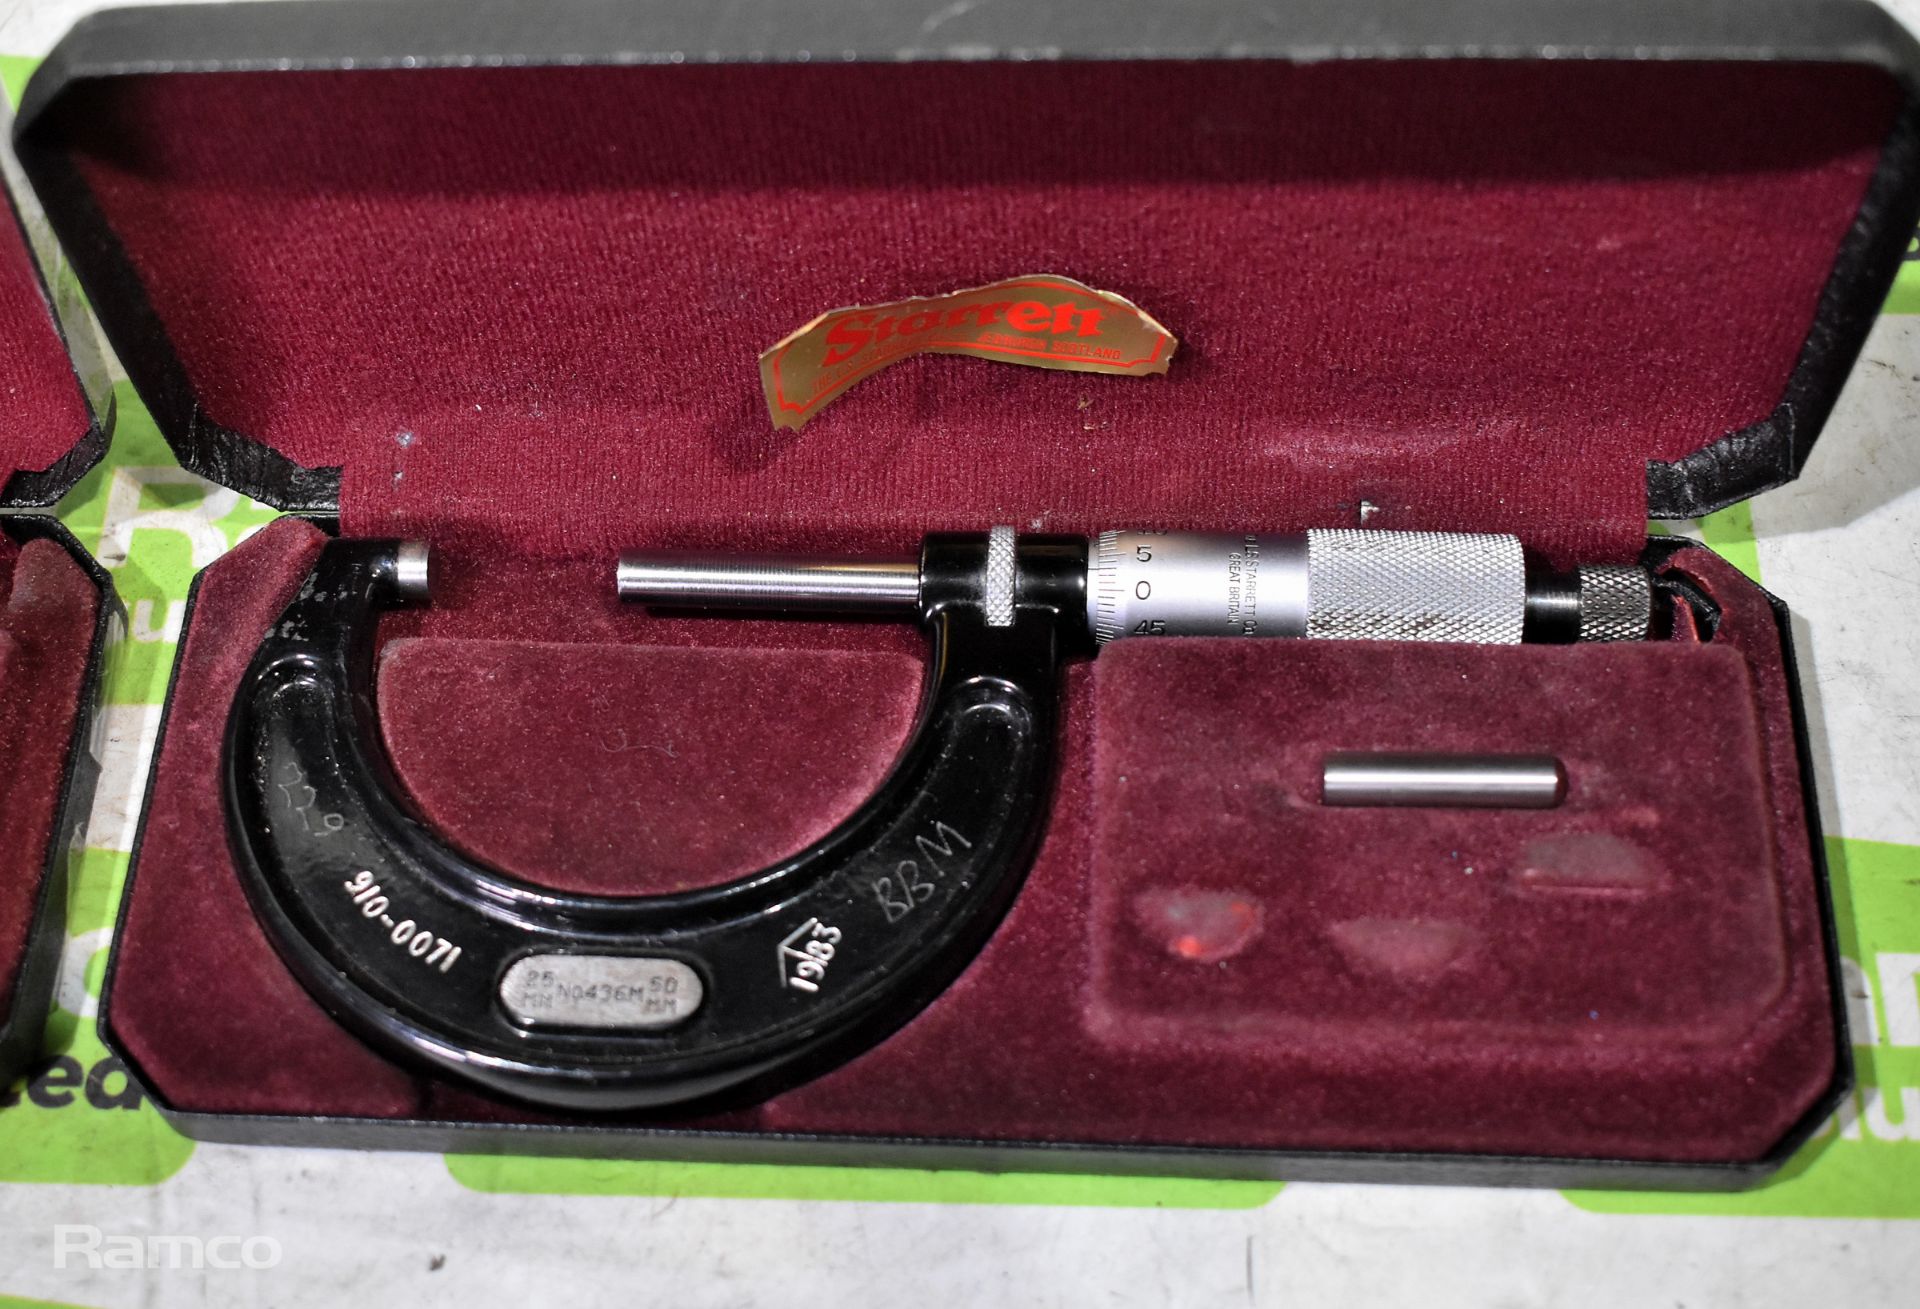 2x Starrett No 436 25-50mm micrometer calipers with case - Image 3 of 4